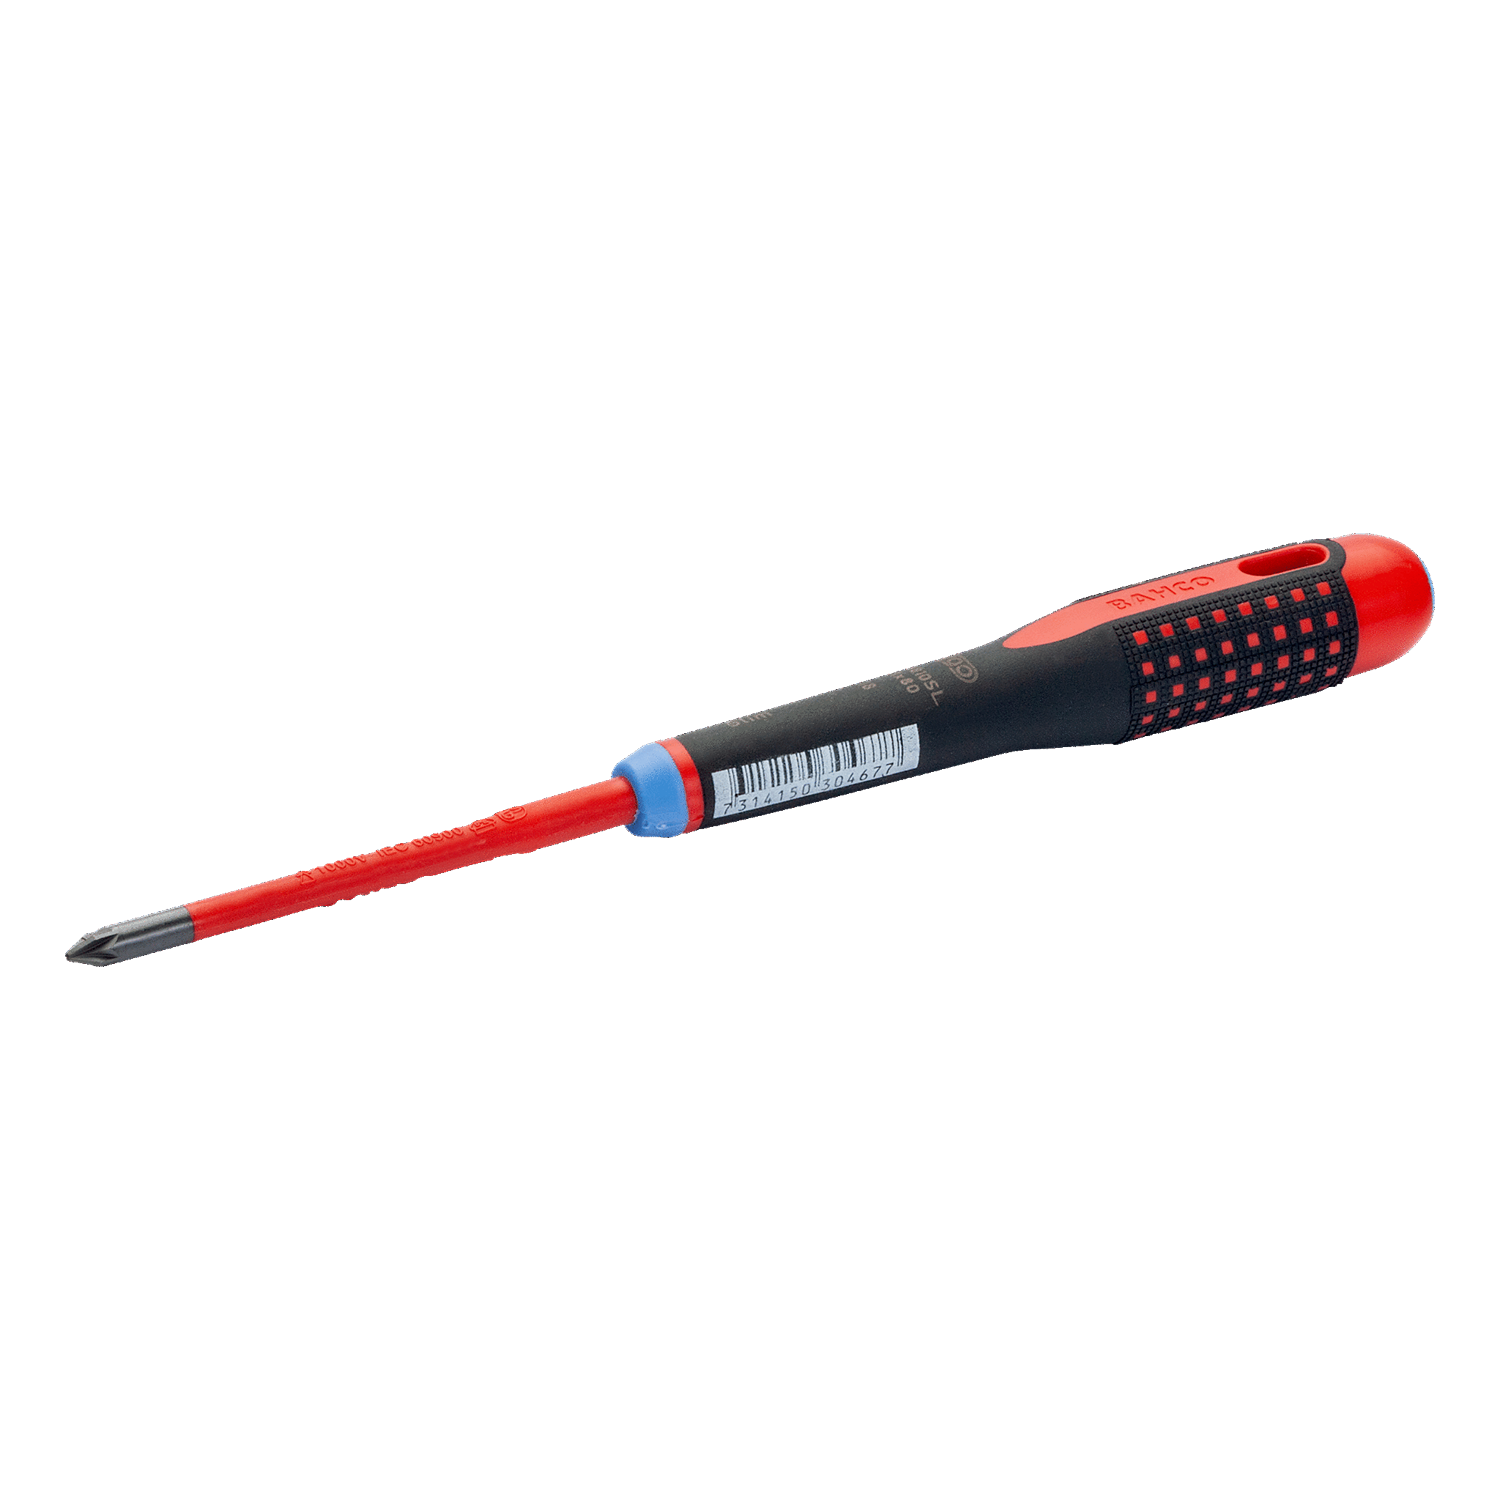 BAHCO BE-8810SL - BE-8820SL VDE Insulated Pozidriv Screwdriver - Premium Pozidriv Screwdriver from BAHCO - Shop now at Yew Aik.